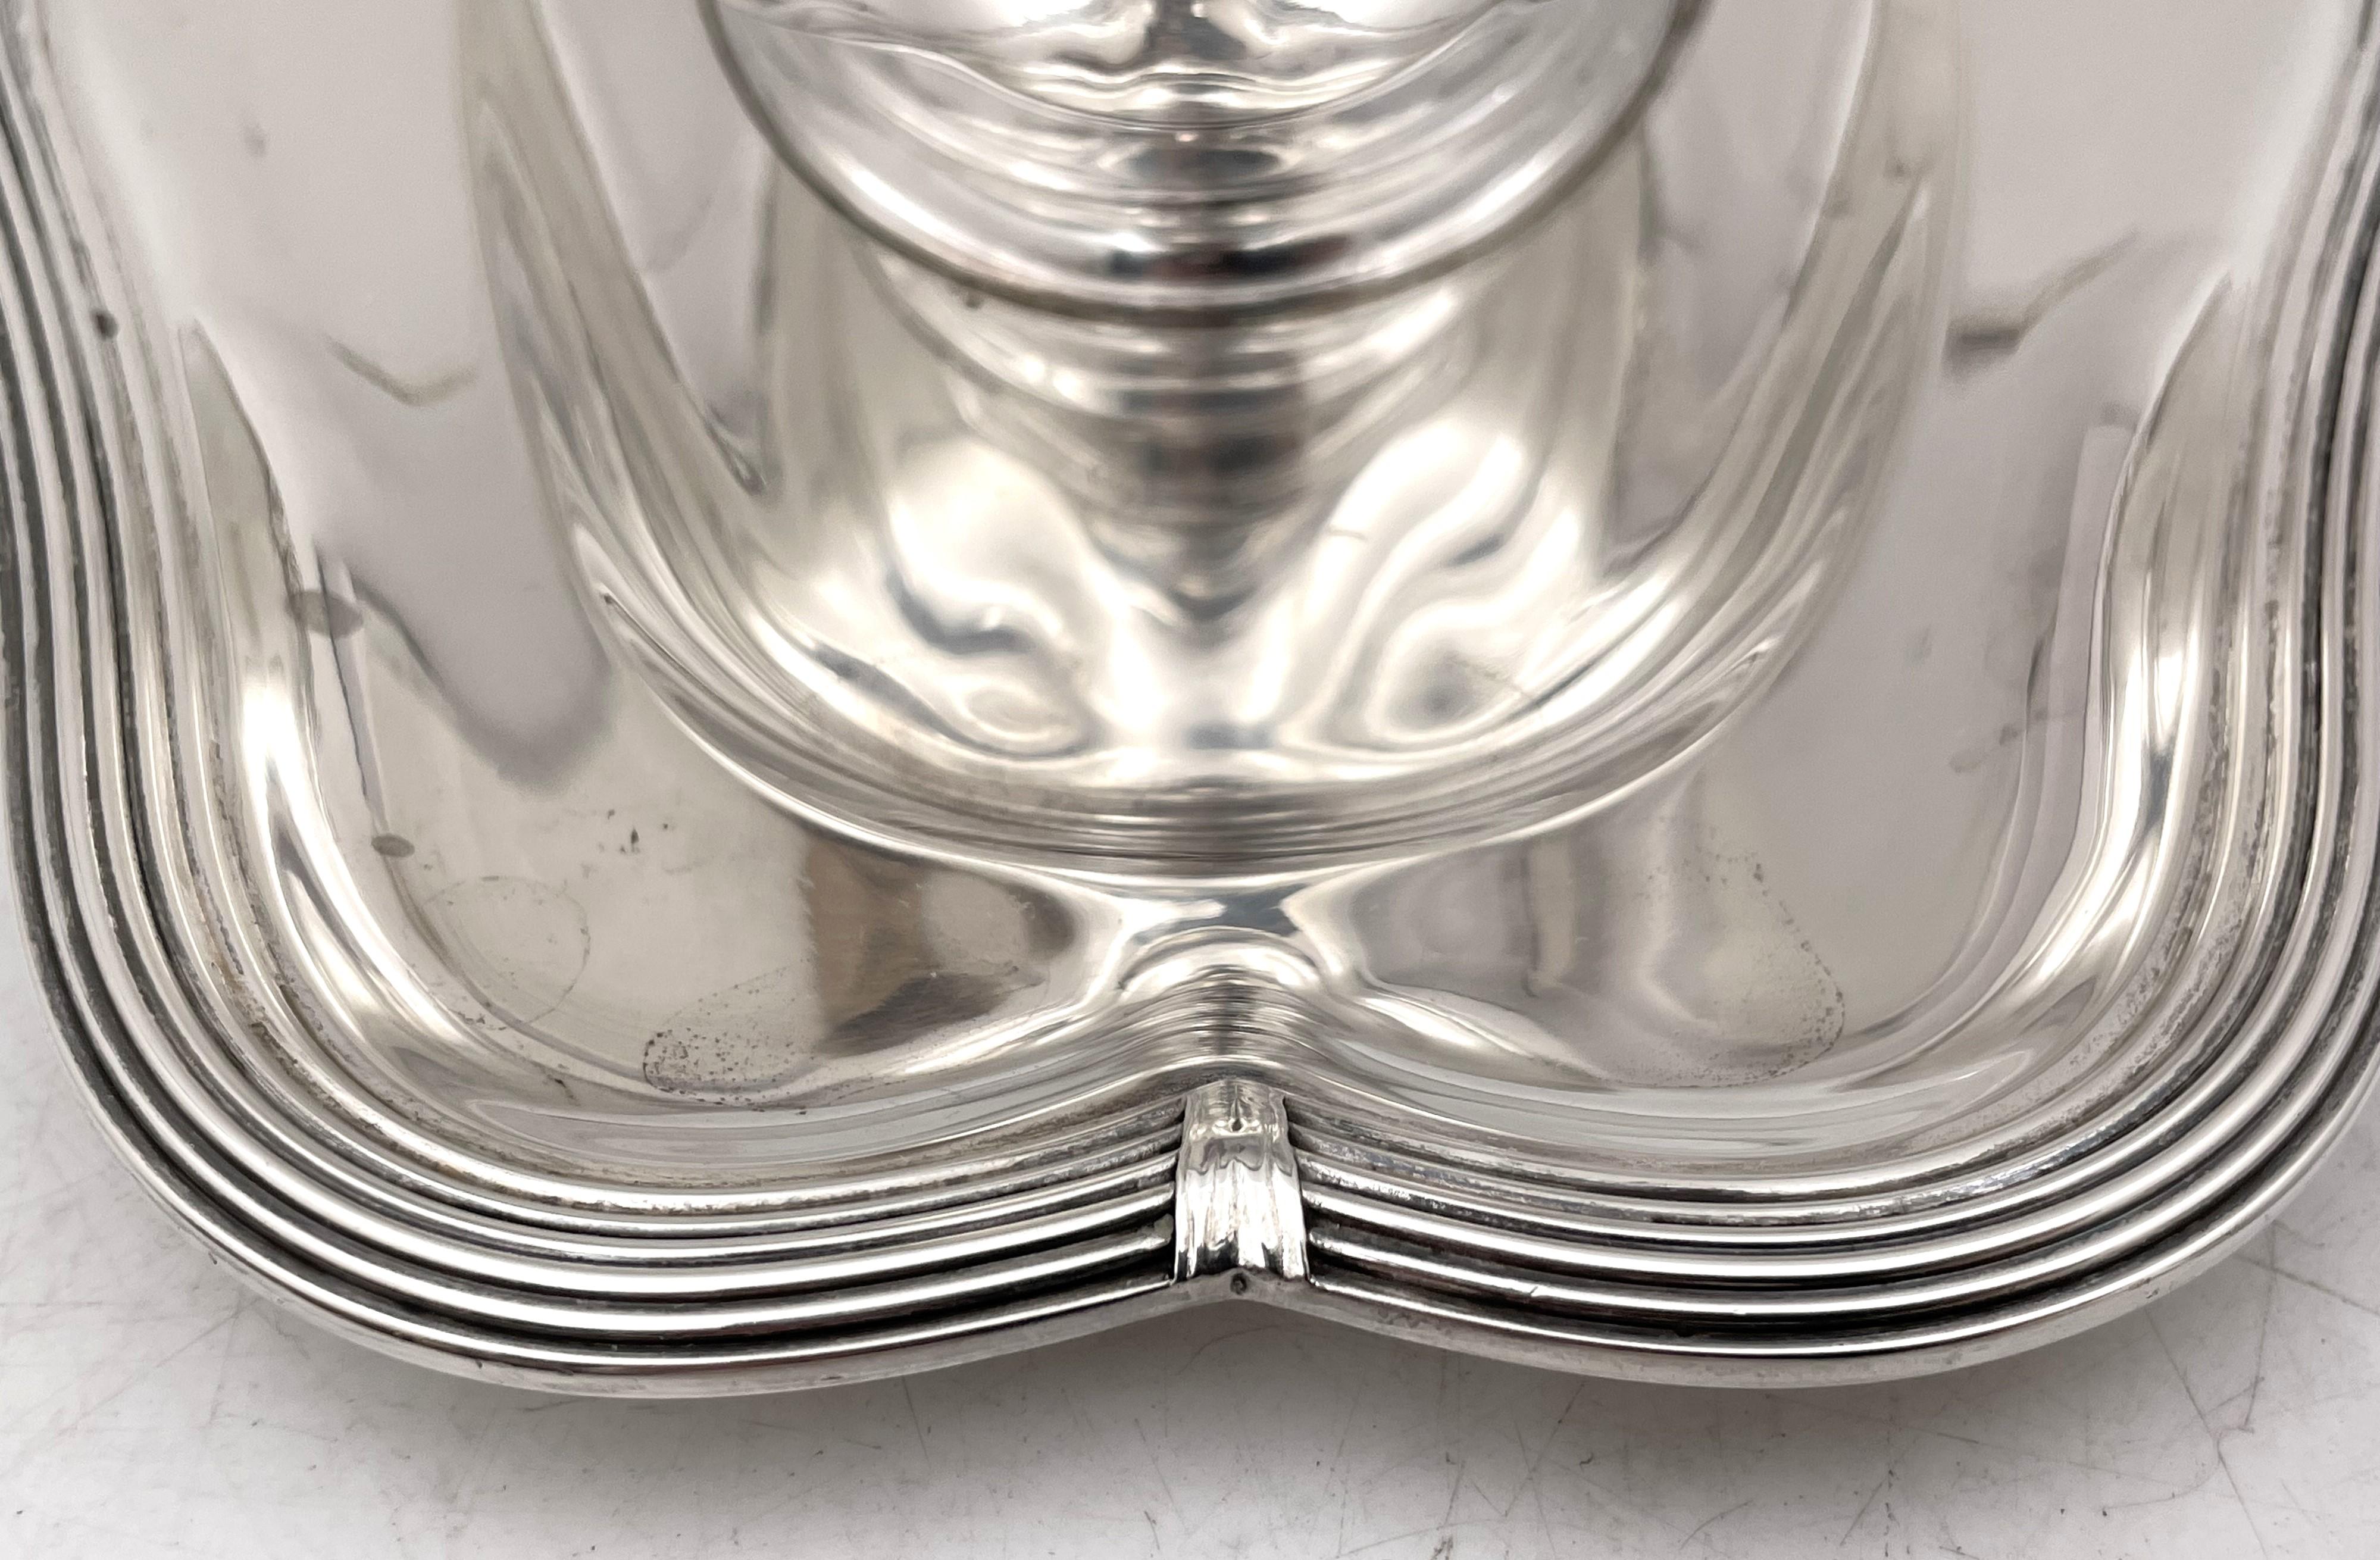 Emile Puiforcat, French 0.950 (higher purity than sterling) silver gravy sauce boat on an underplate, in Art Deco Style with an elegant, geometric design, the rims adorned with geometric, ribbon, and stylized natural motifs. The underplate measures